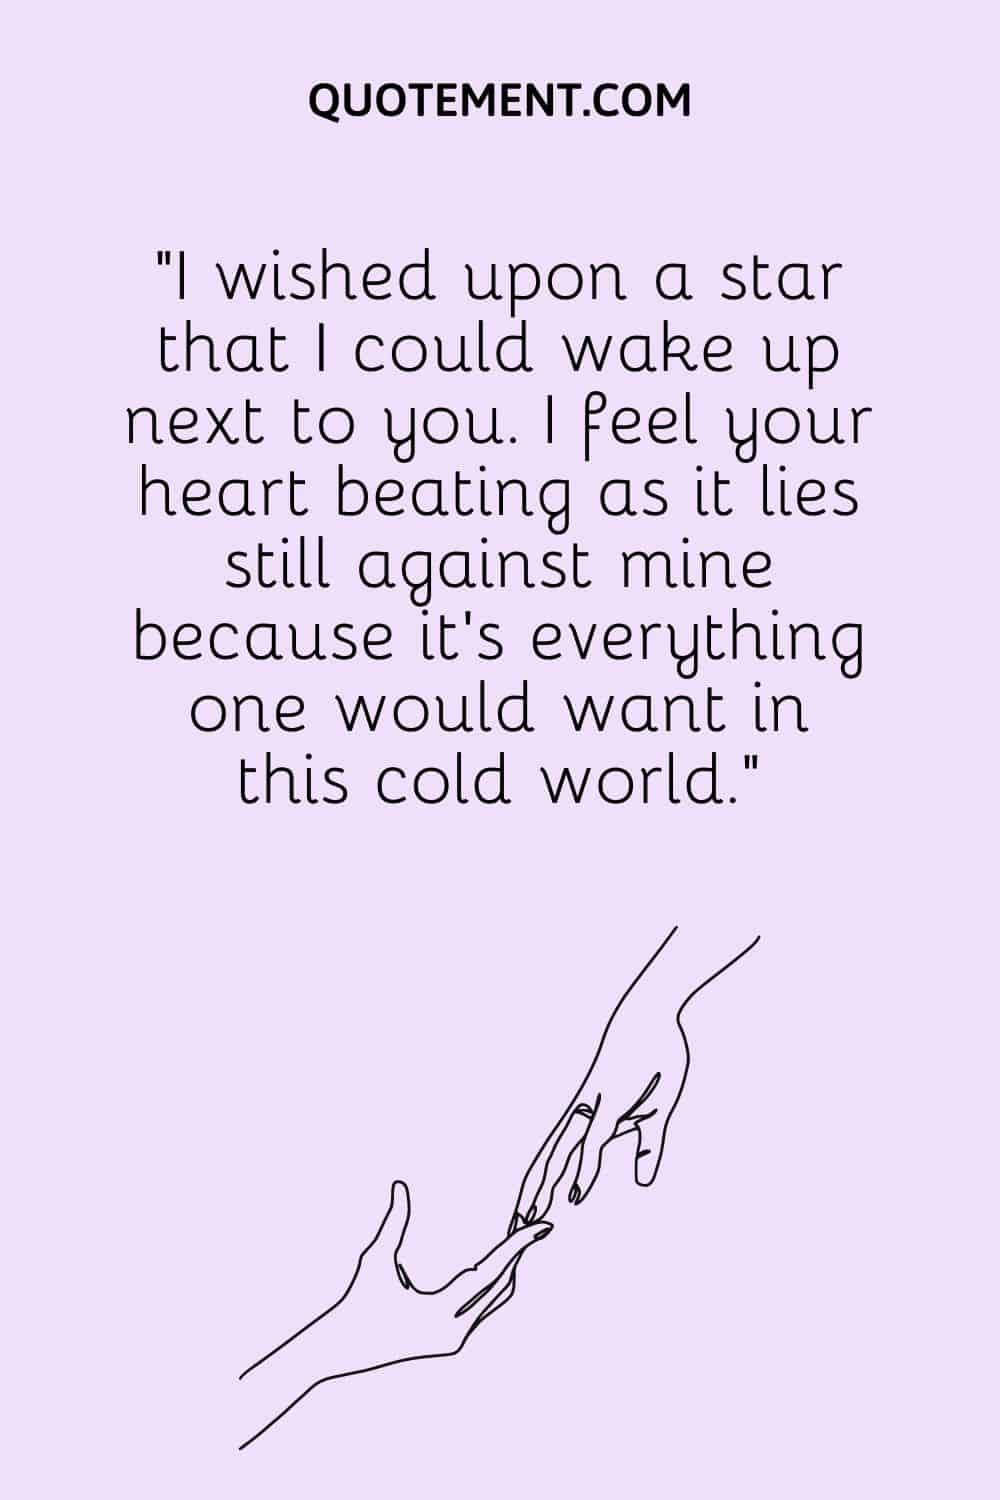 I wished upon a star that I could wake up next to you.